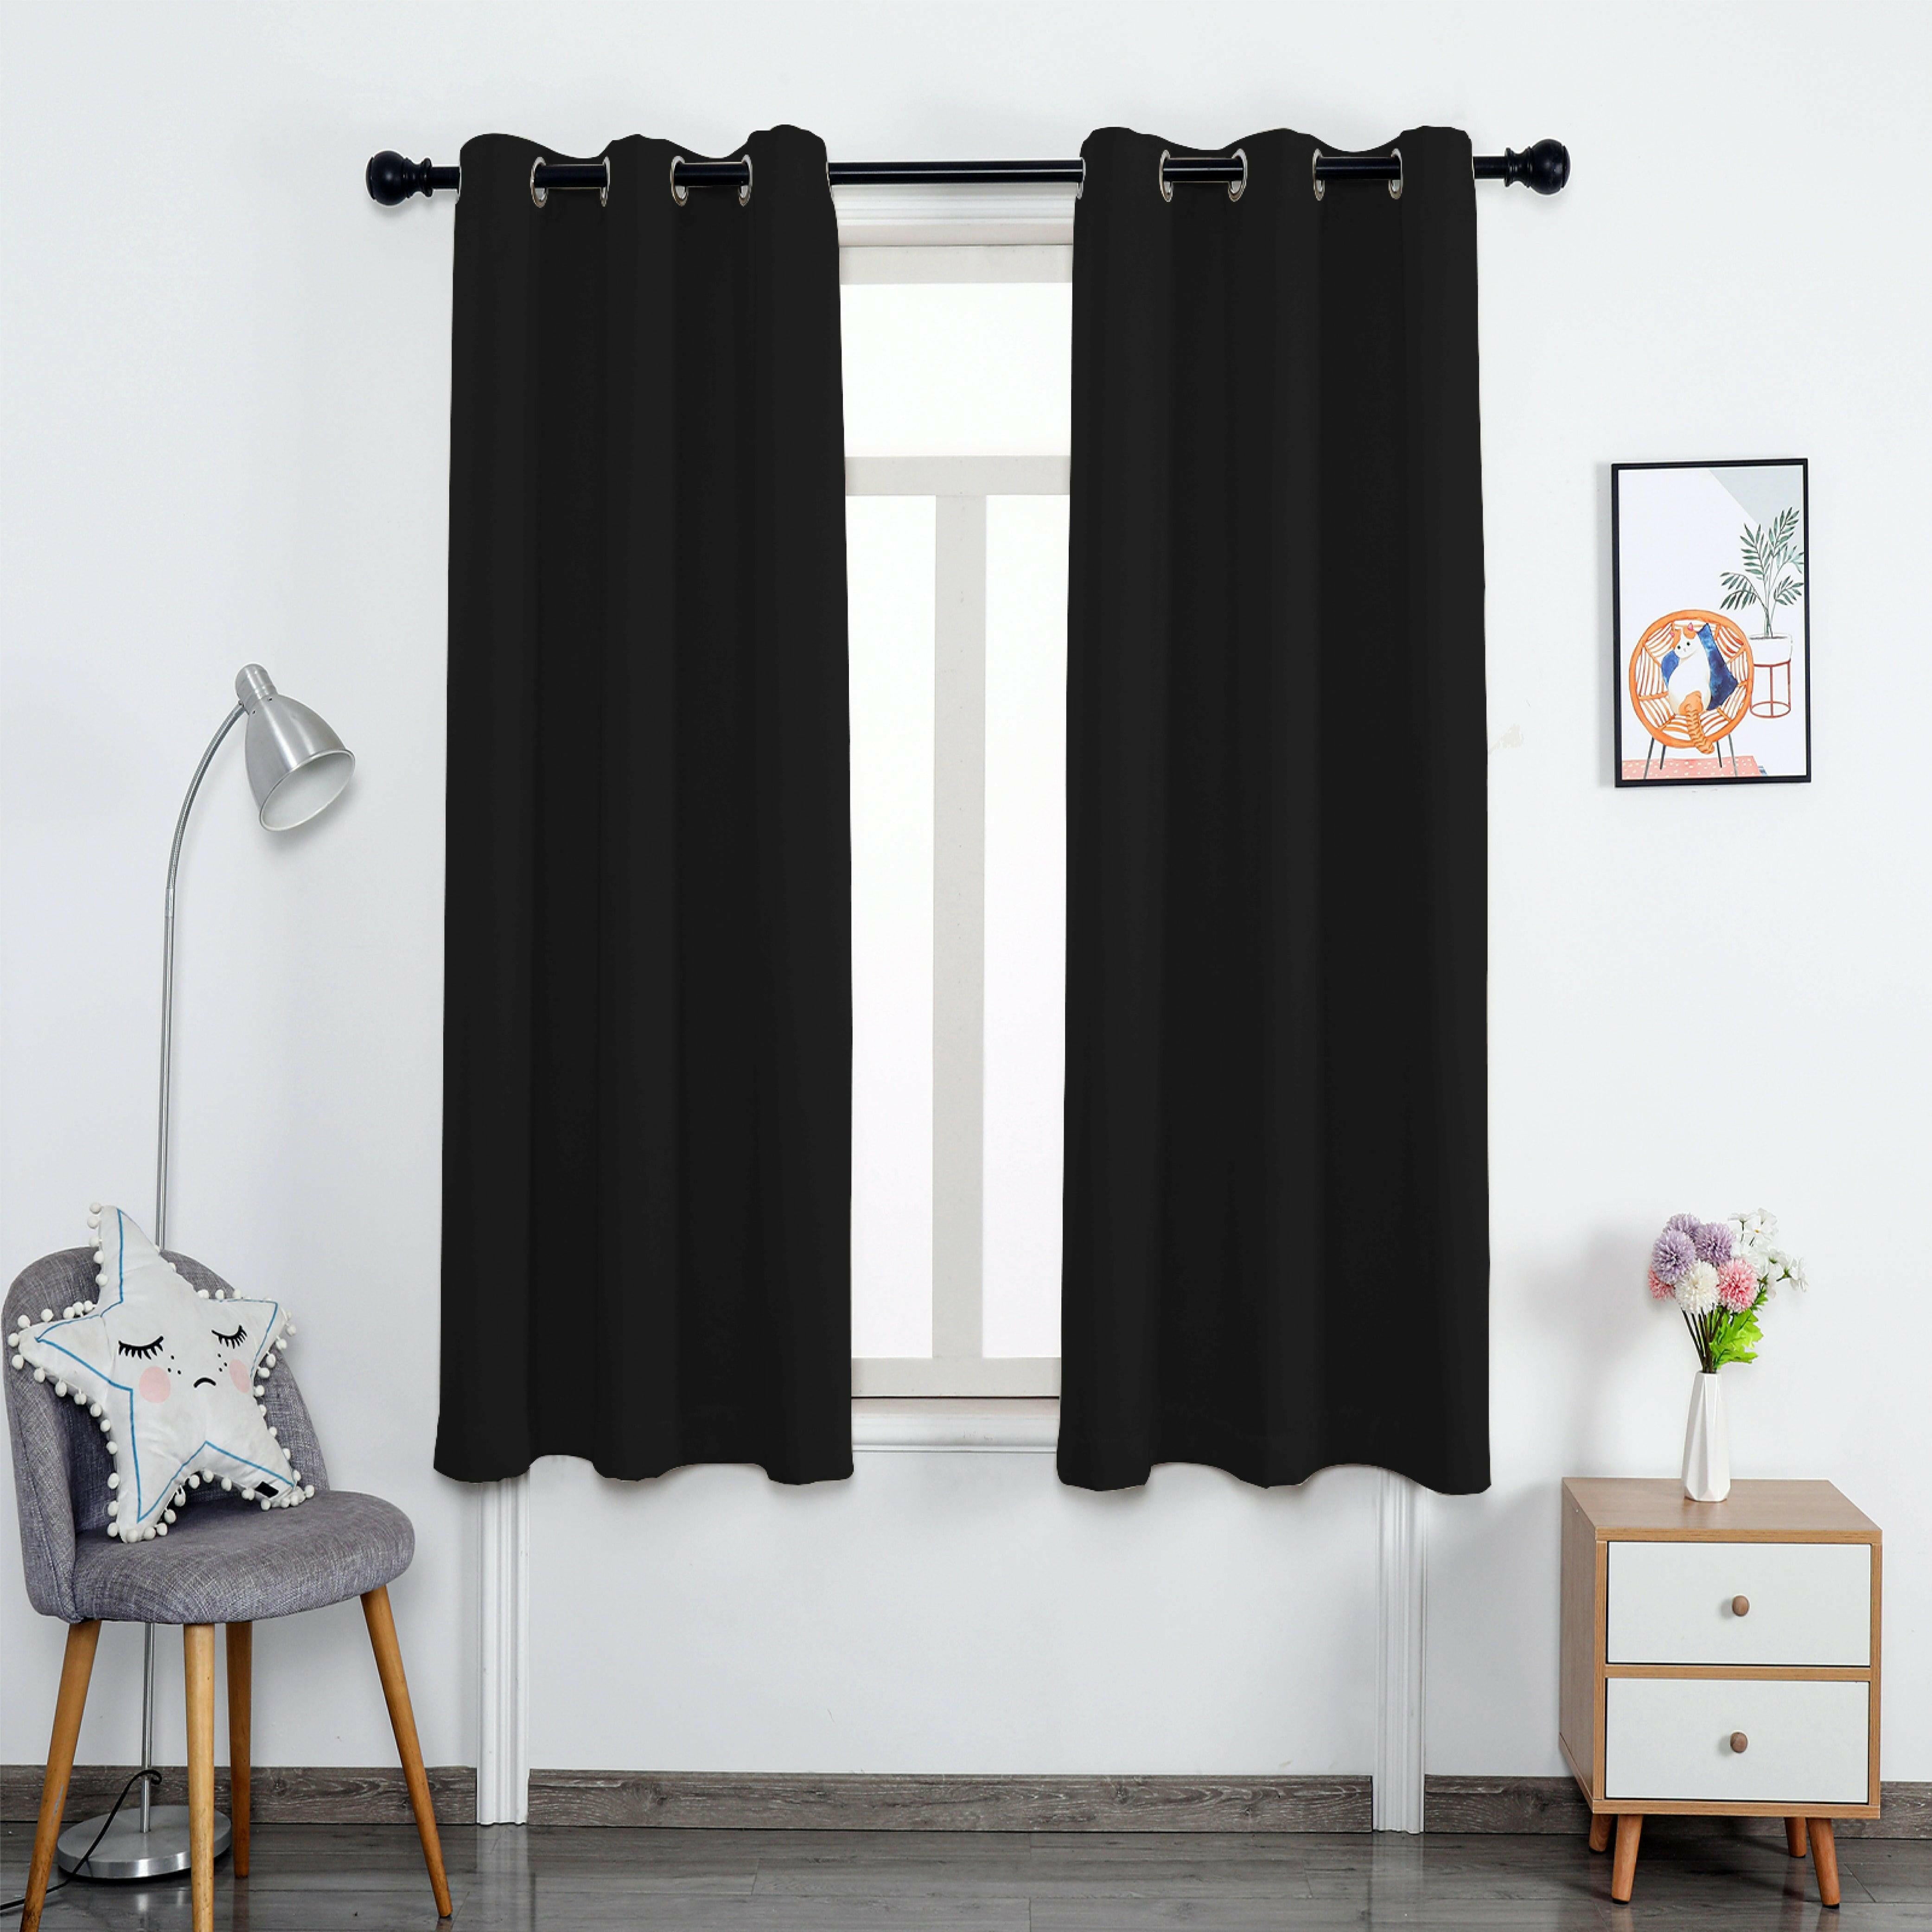 Hyper Cover 3-Layers Blockout Curtains Black | Window Curtains | Brilliant Home Living